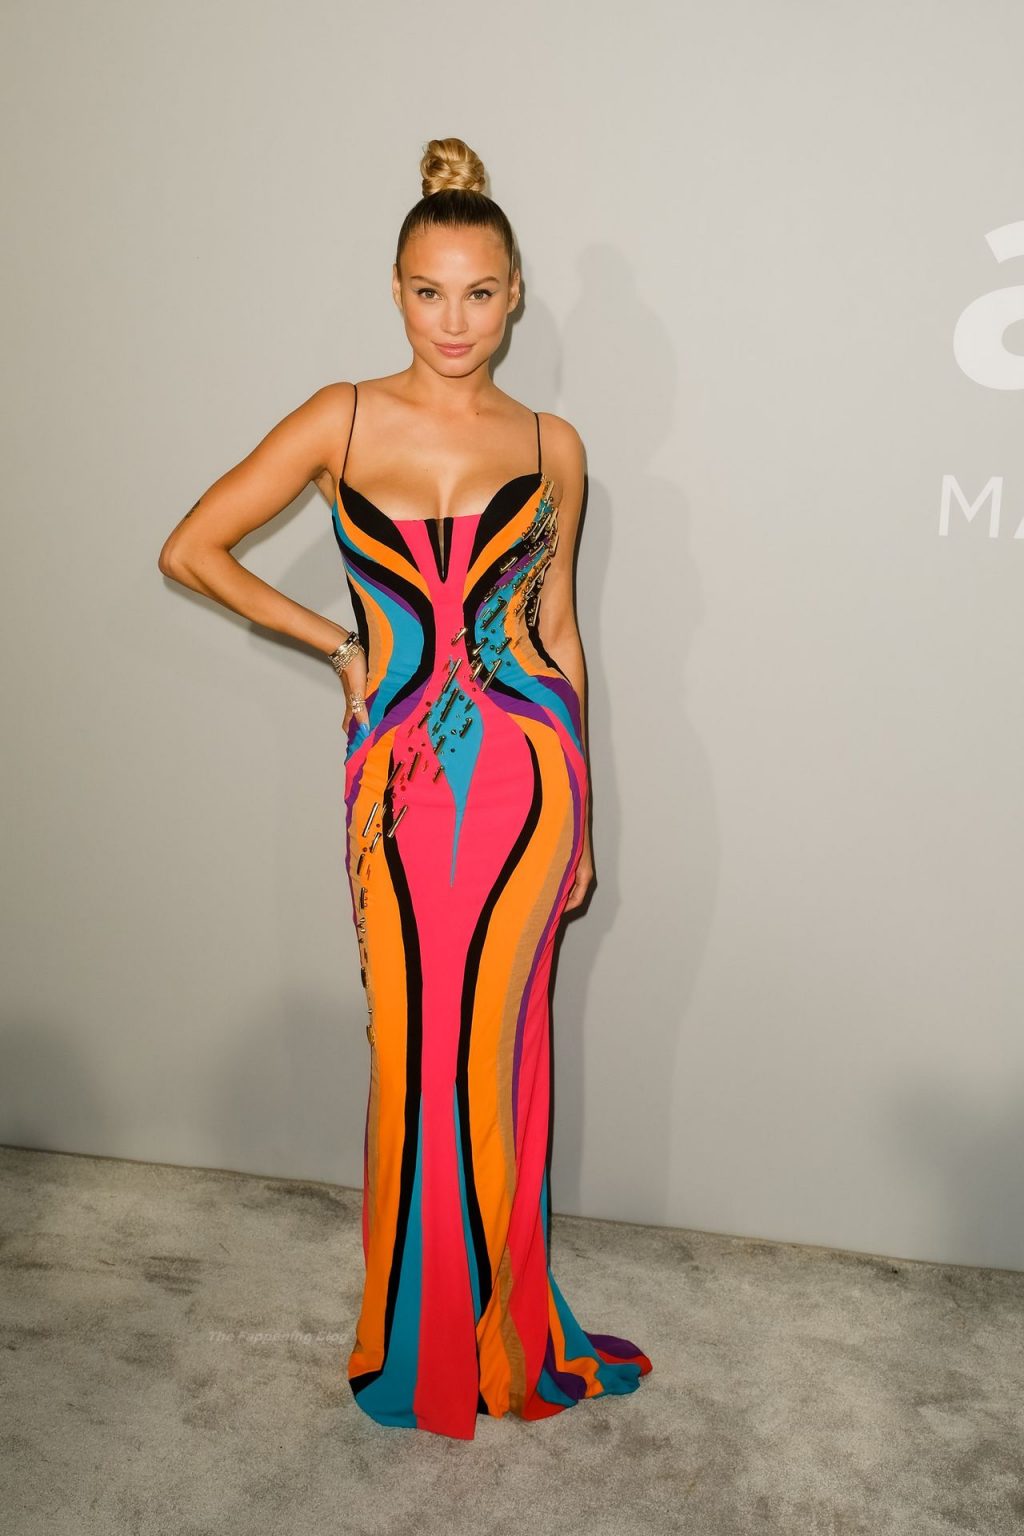 Rose Bertram Shows Off Her Cleavage at the 27th AmfAR Gala in Cannes (16 Photos)